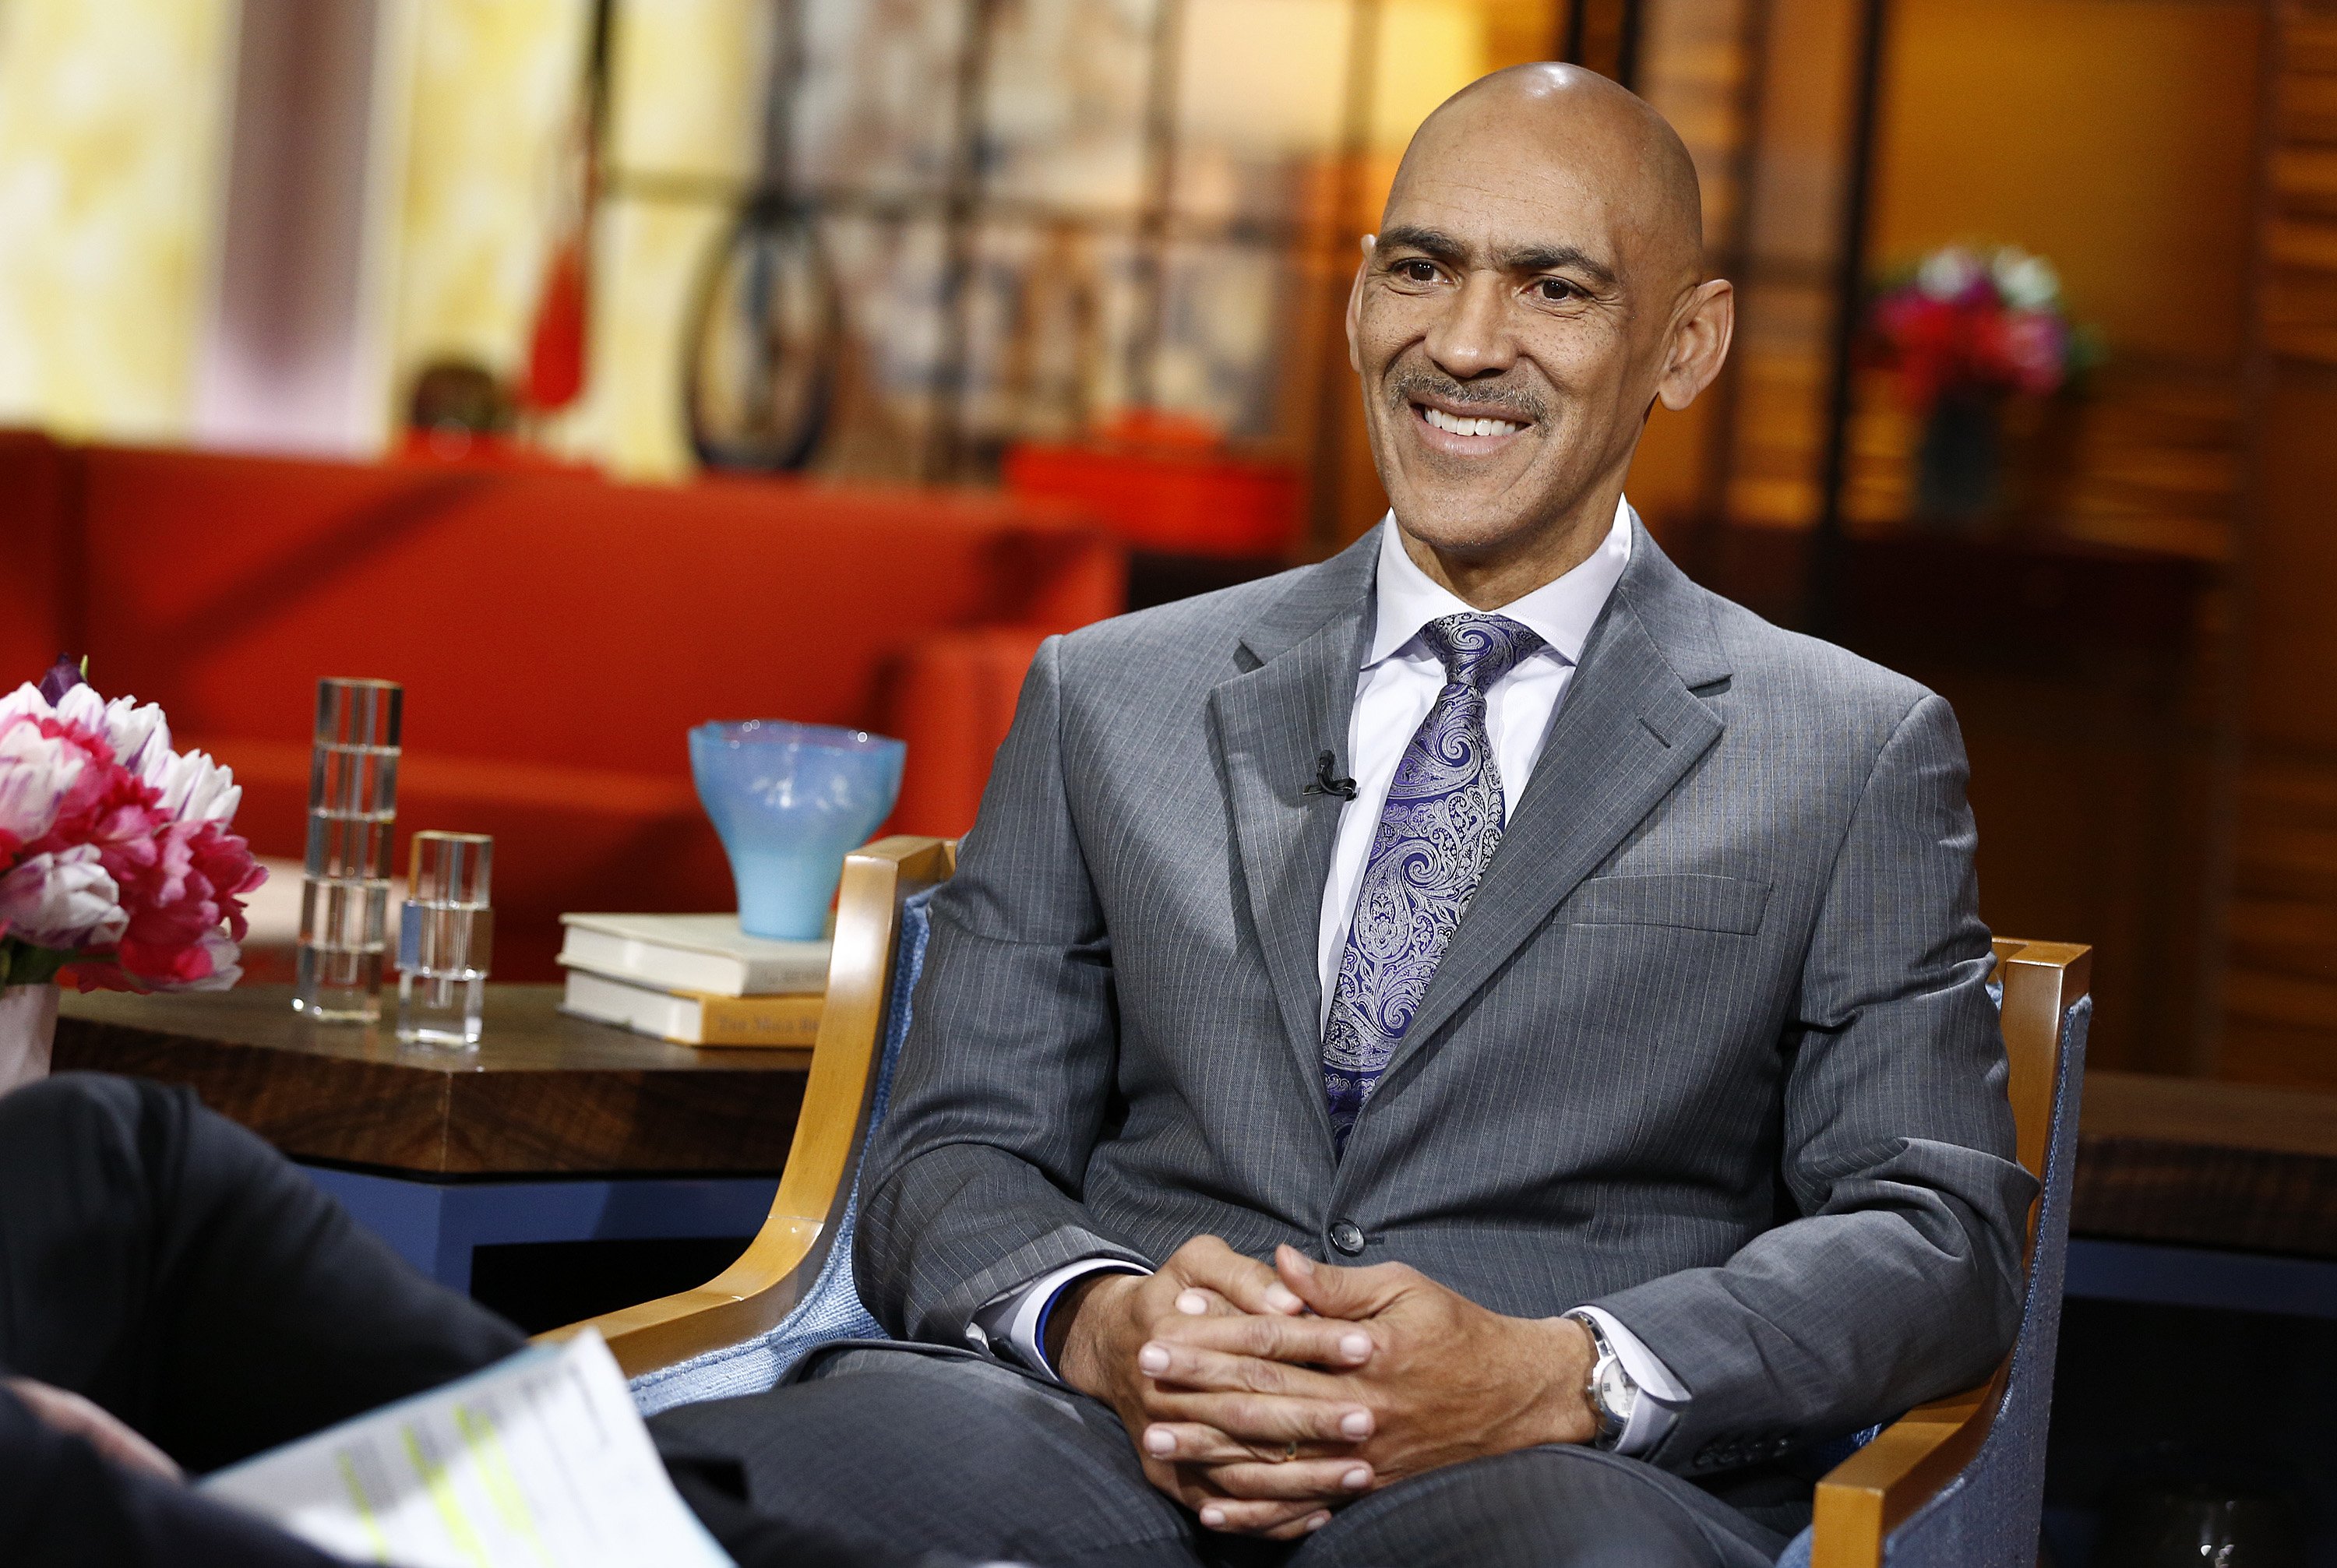 TODAY -- Pictured: Tony Dungy appears on NBC News' "Today" show, January 29, 2014 | Photo: GettyImages